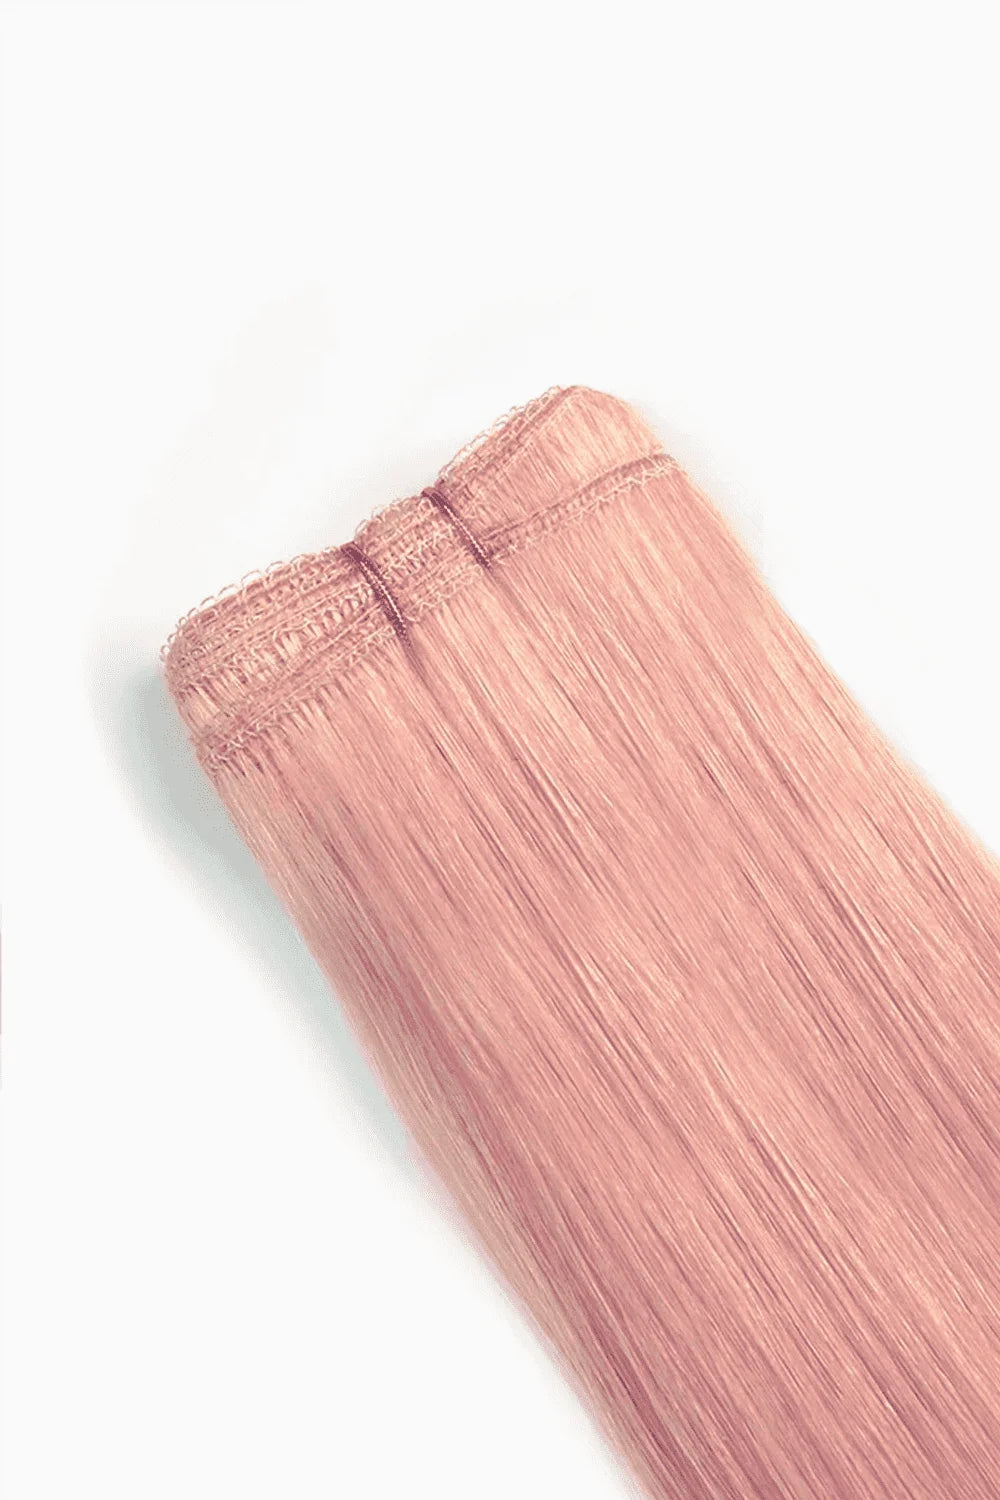 pastel pink hair weft extension